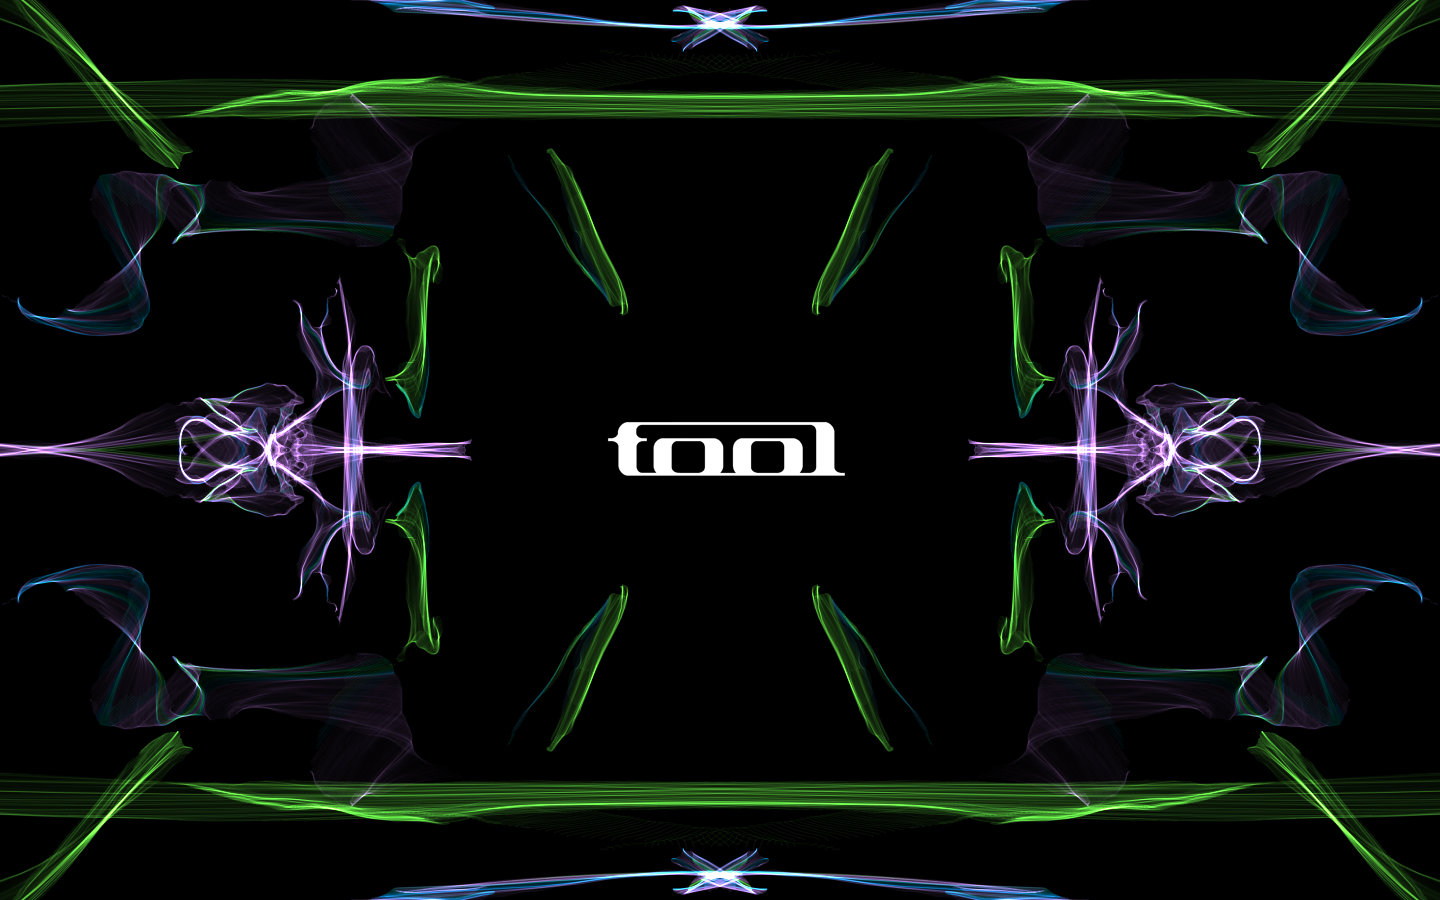 Tool Picture by VTX